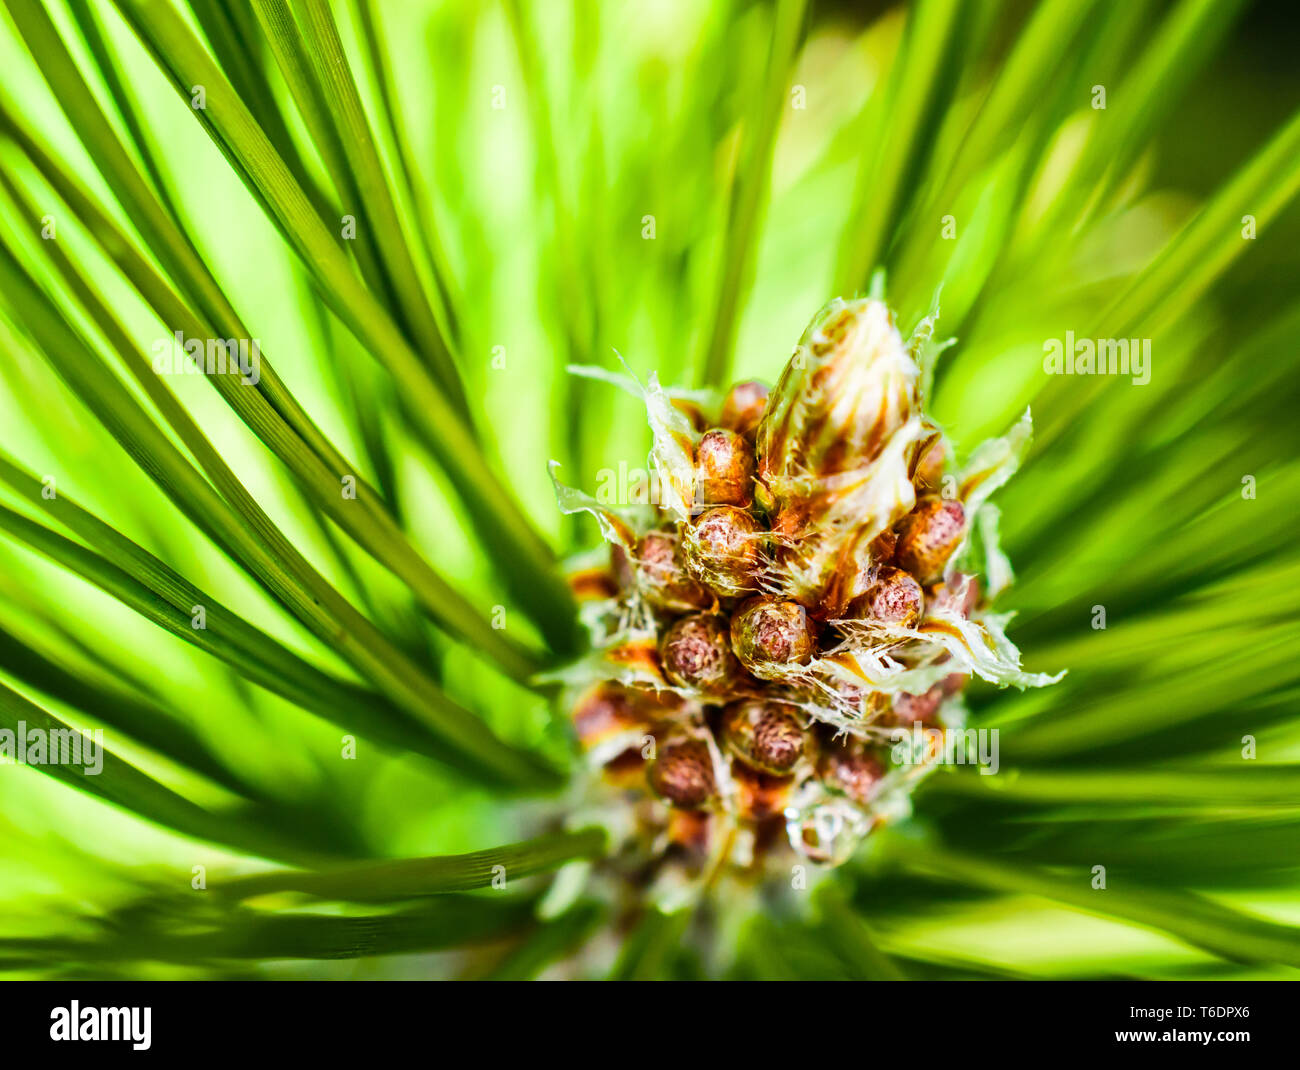 Closeup (macro) View of Red Pine (Pinus resinosa) Male Pollen Cone (Pinecone) in Early Spring Stock Photo